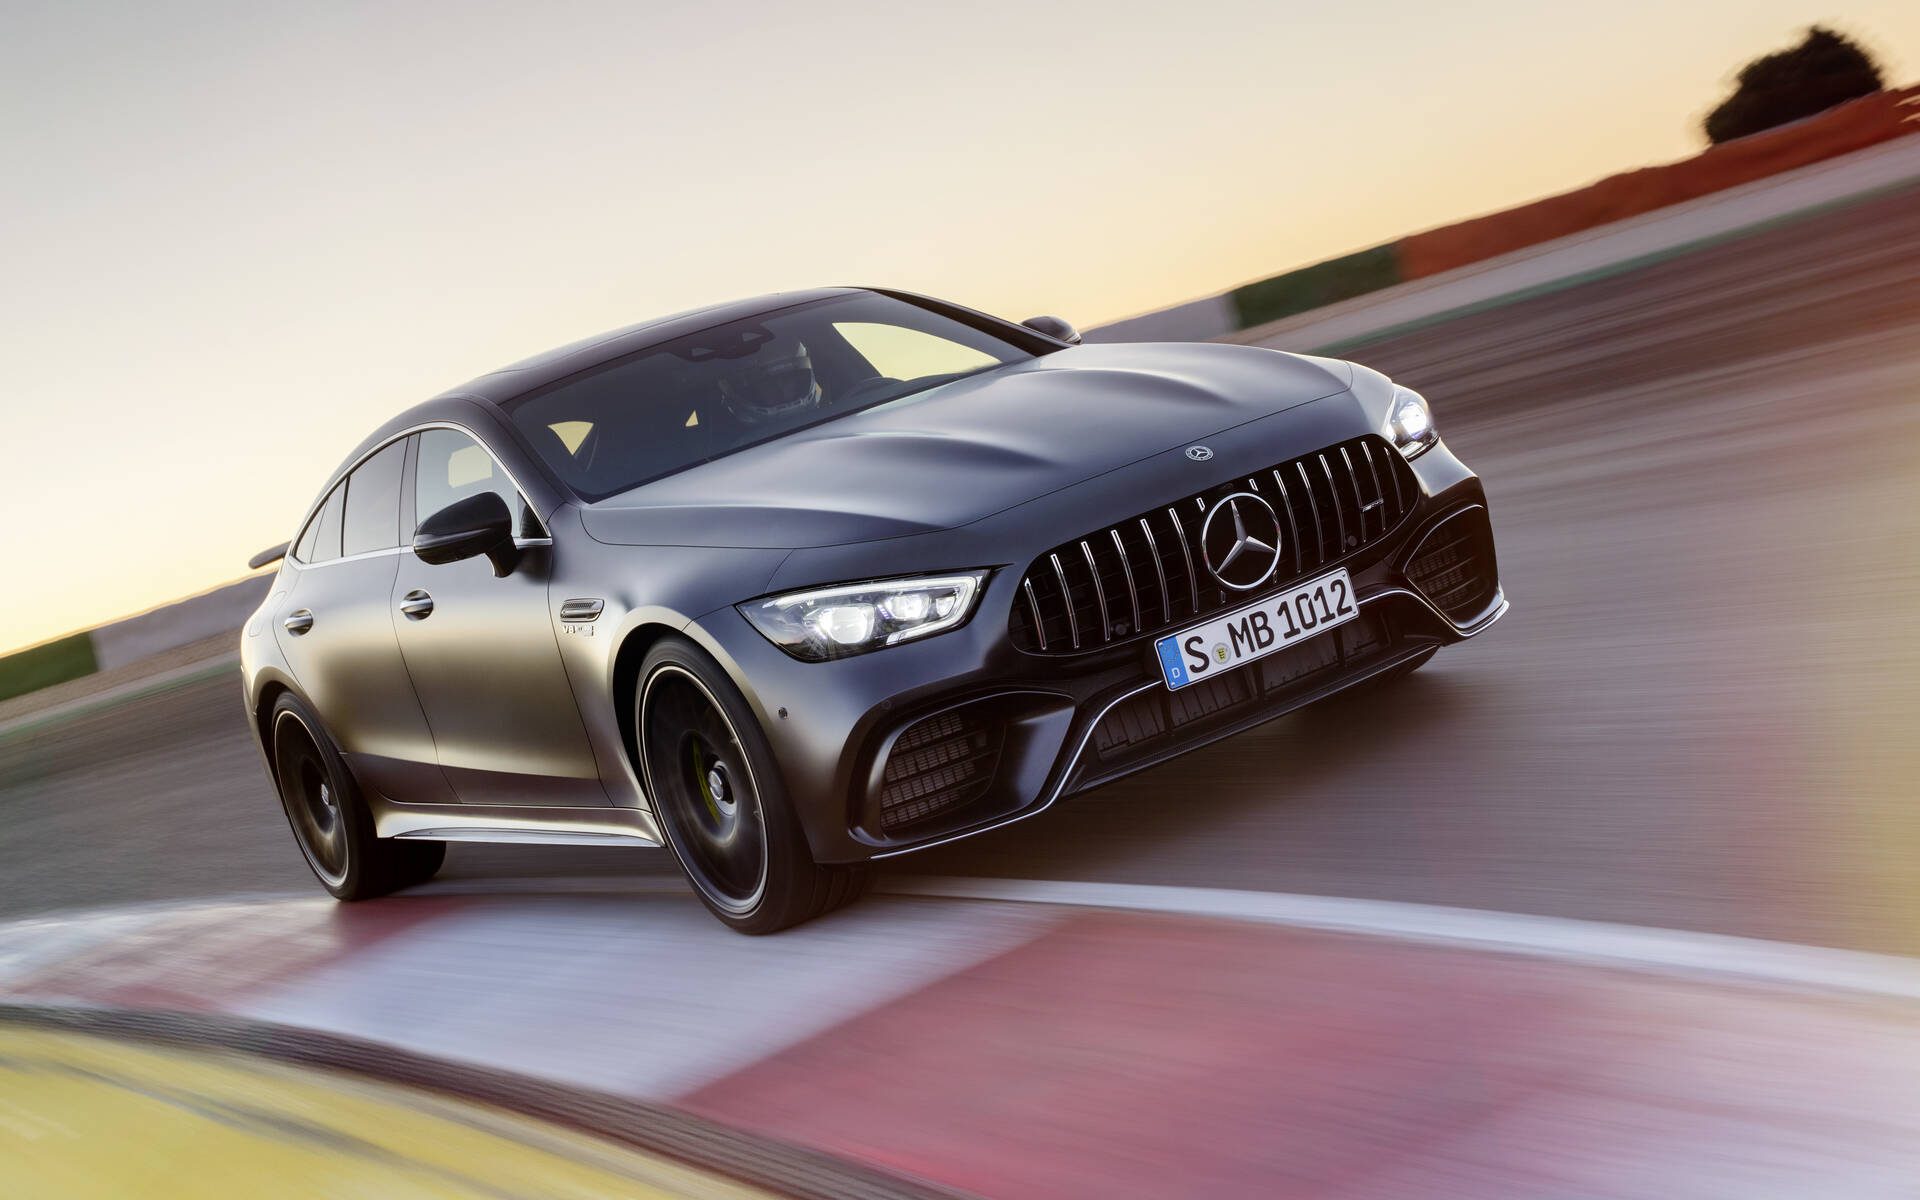 21 Mercedes Benz Amg Gt 4 Door Coupe 63 S 4matic Specifications The Car Guide